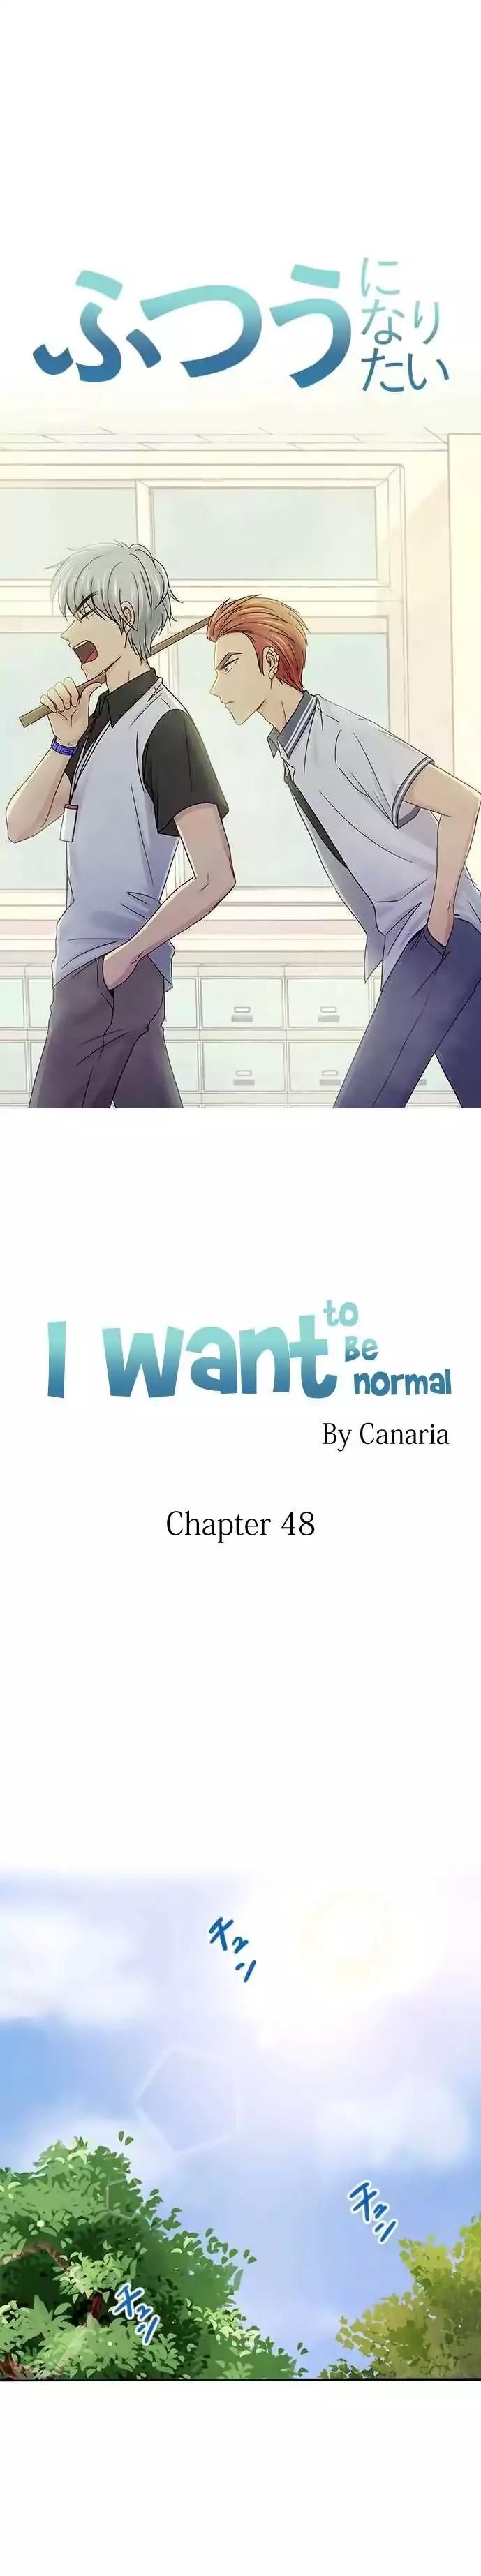 I want to be normal Chapter 48 page 1